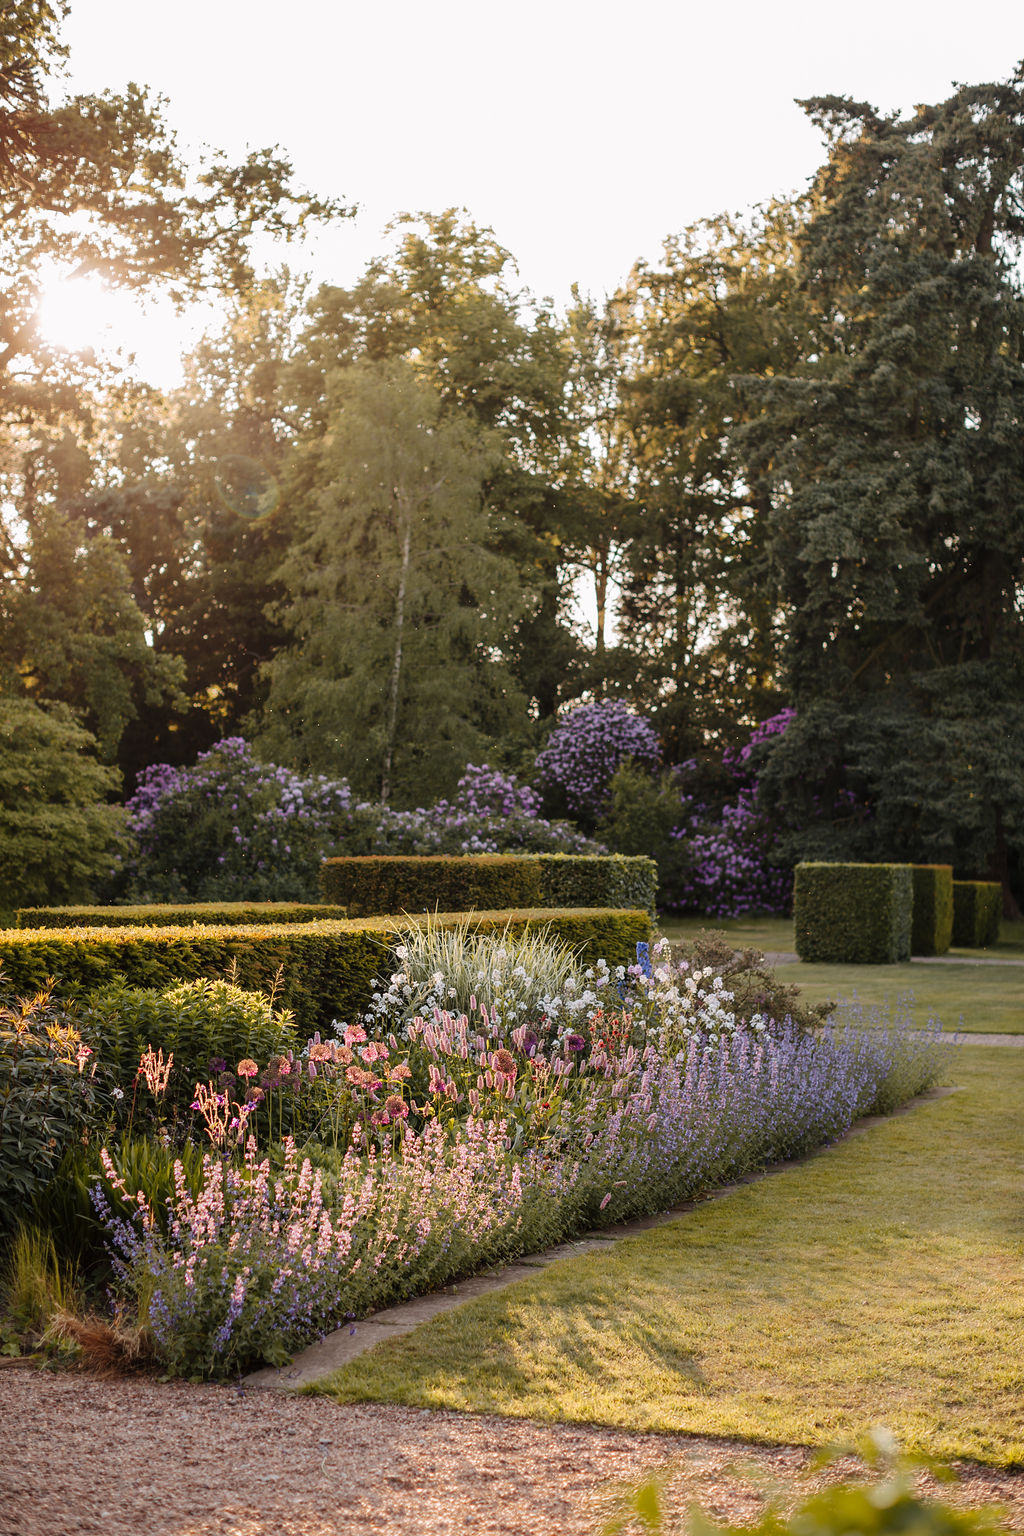 A view of an established garden bed with catmint and nemesia in the foreground with established yew hedges and evergreen mature trees in the background with the late summer sunlight pouring through the trees